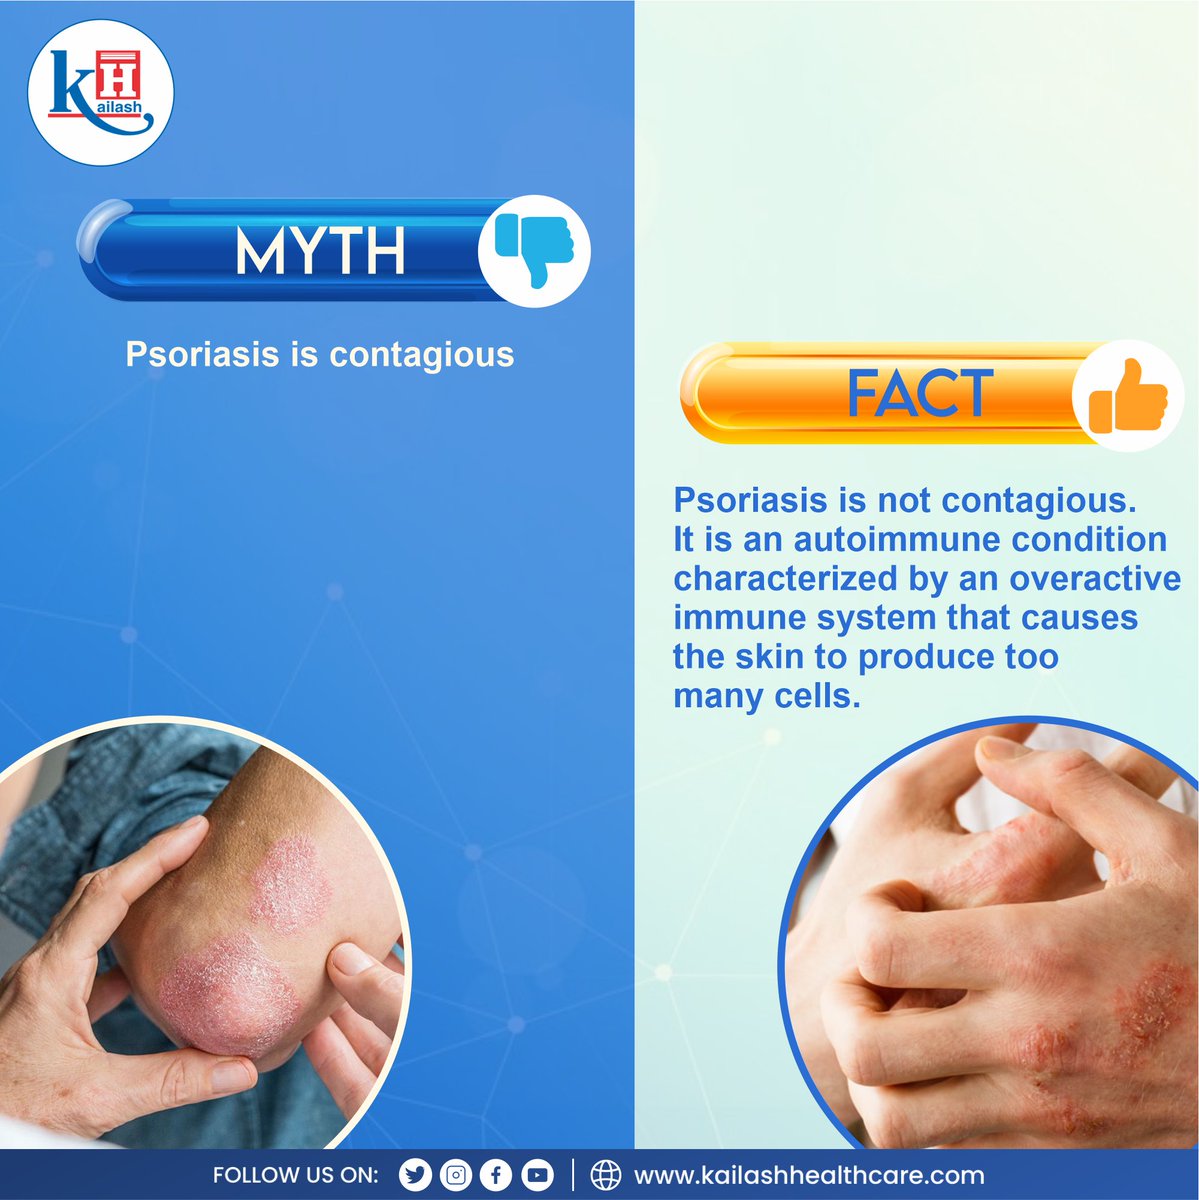 Is Psoriasis contagious? Here's debunking myths about #psoriasis !

Consult our Skin Specialists: kailashhealthcare.com

#skinhealth #psoriasiscare #skinallergy #tchiness #skintreatment